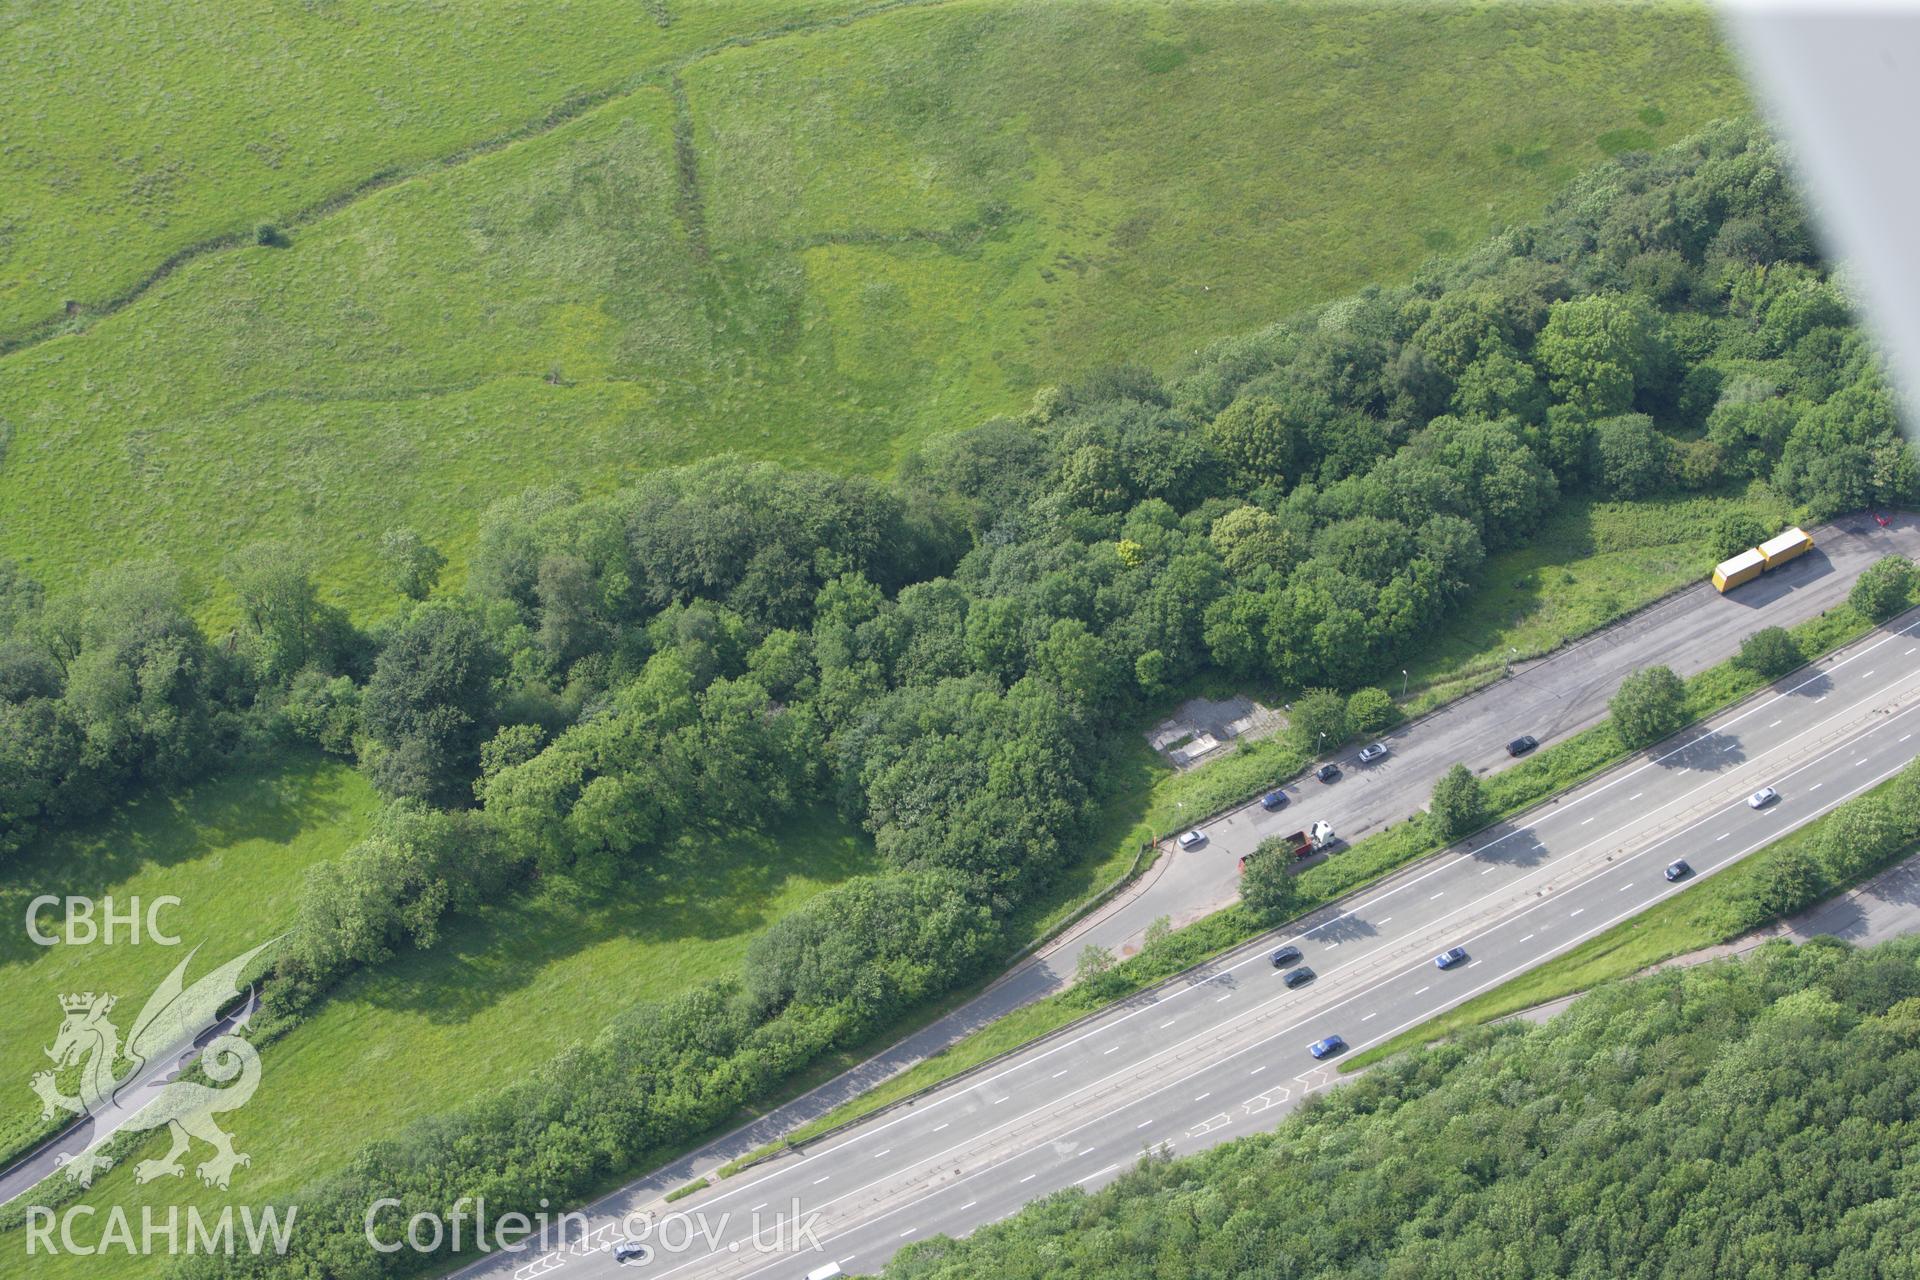 RCAHMW colour oblique aerial photograph of Kemeys Inferior Castle Earthwork. Taken on 11 June 2009 by Toby Driver